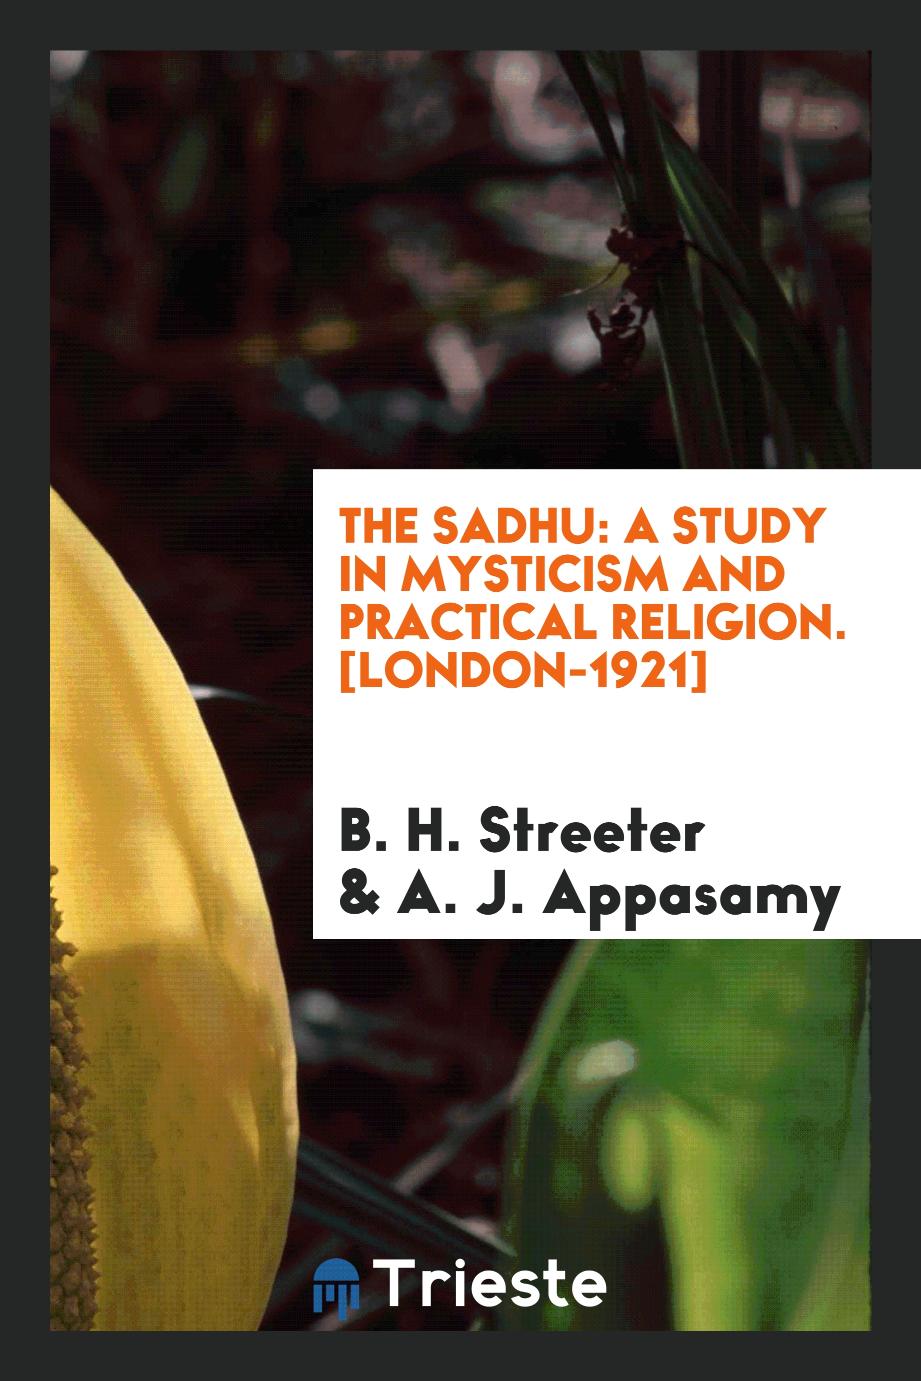 The Sadhu: A Study in Mysticism and Practical Religion. [London-1921]